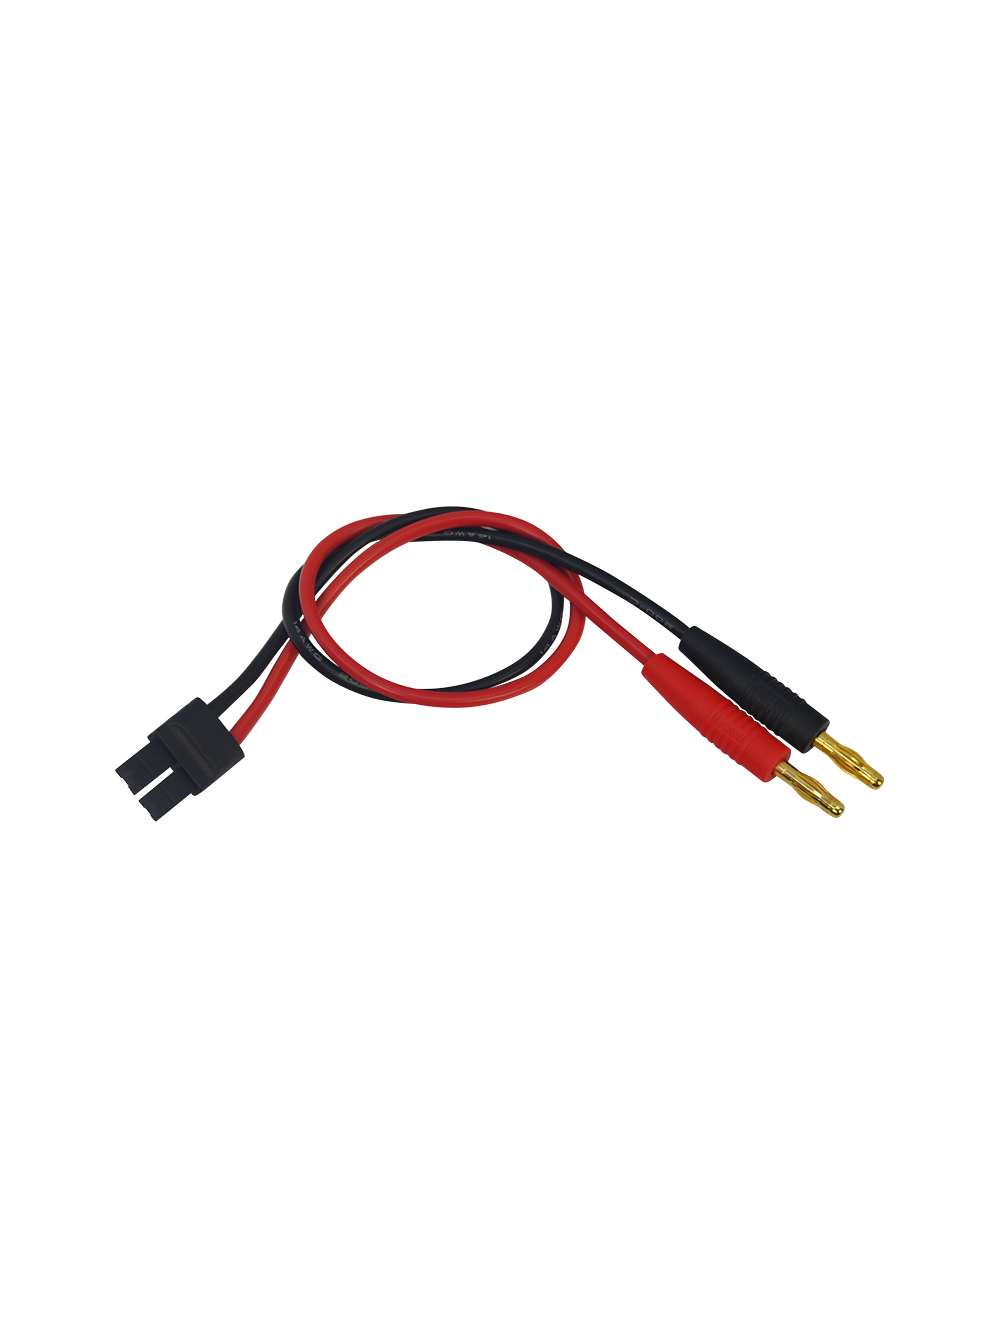 TRAXXAS TO 4MM GOLD CONNECTORS Charge Lead 3188